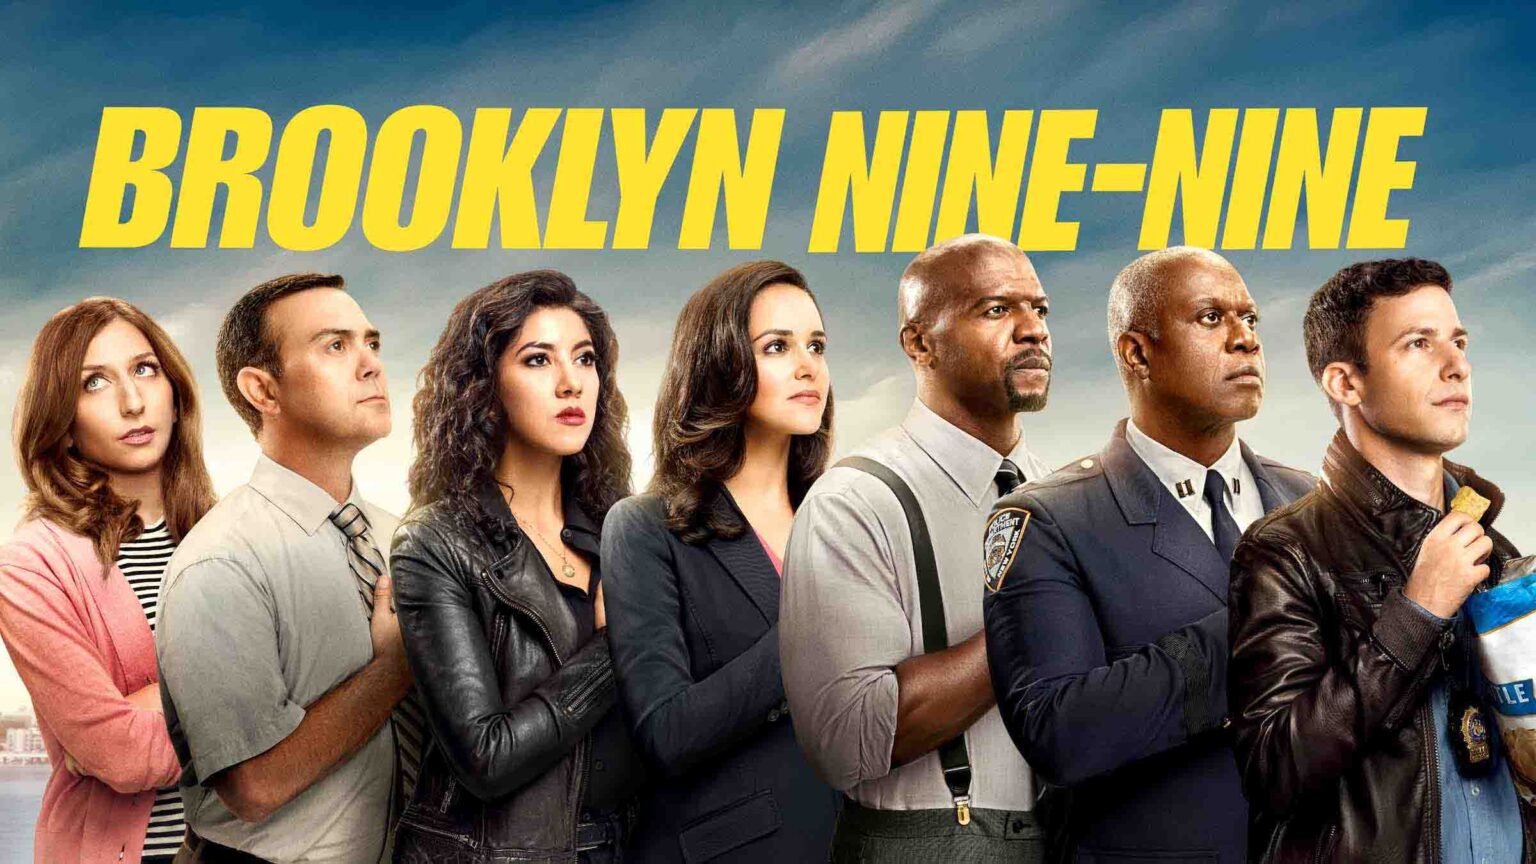 Did you know there's a French-Canadian version of 'Brooklyn 99'? See what fans are saying about the remakes' interesting trailer.